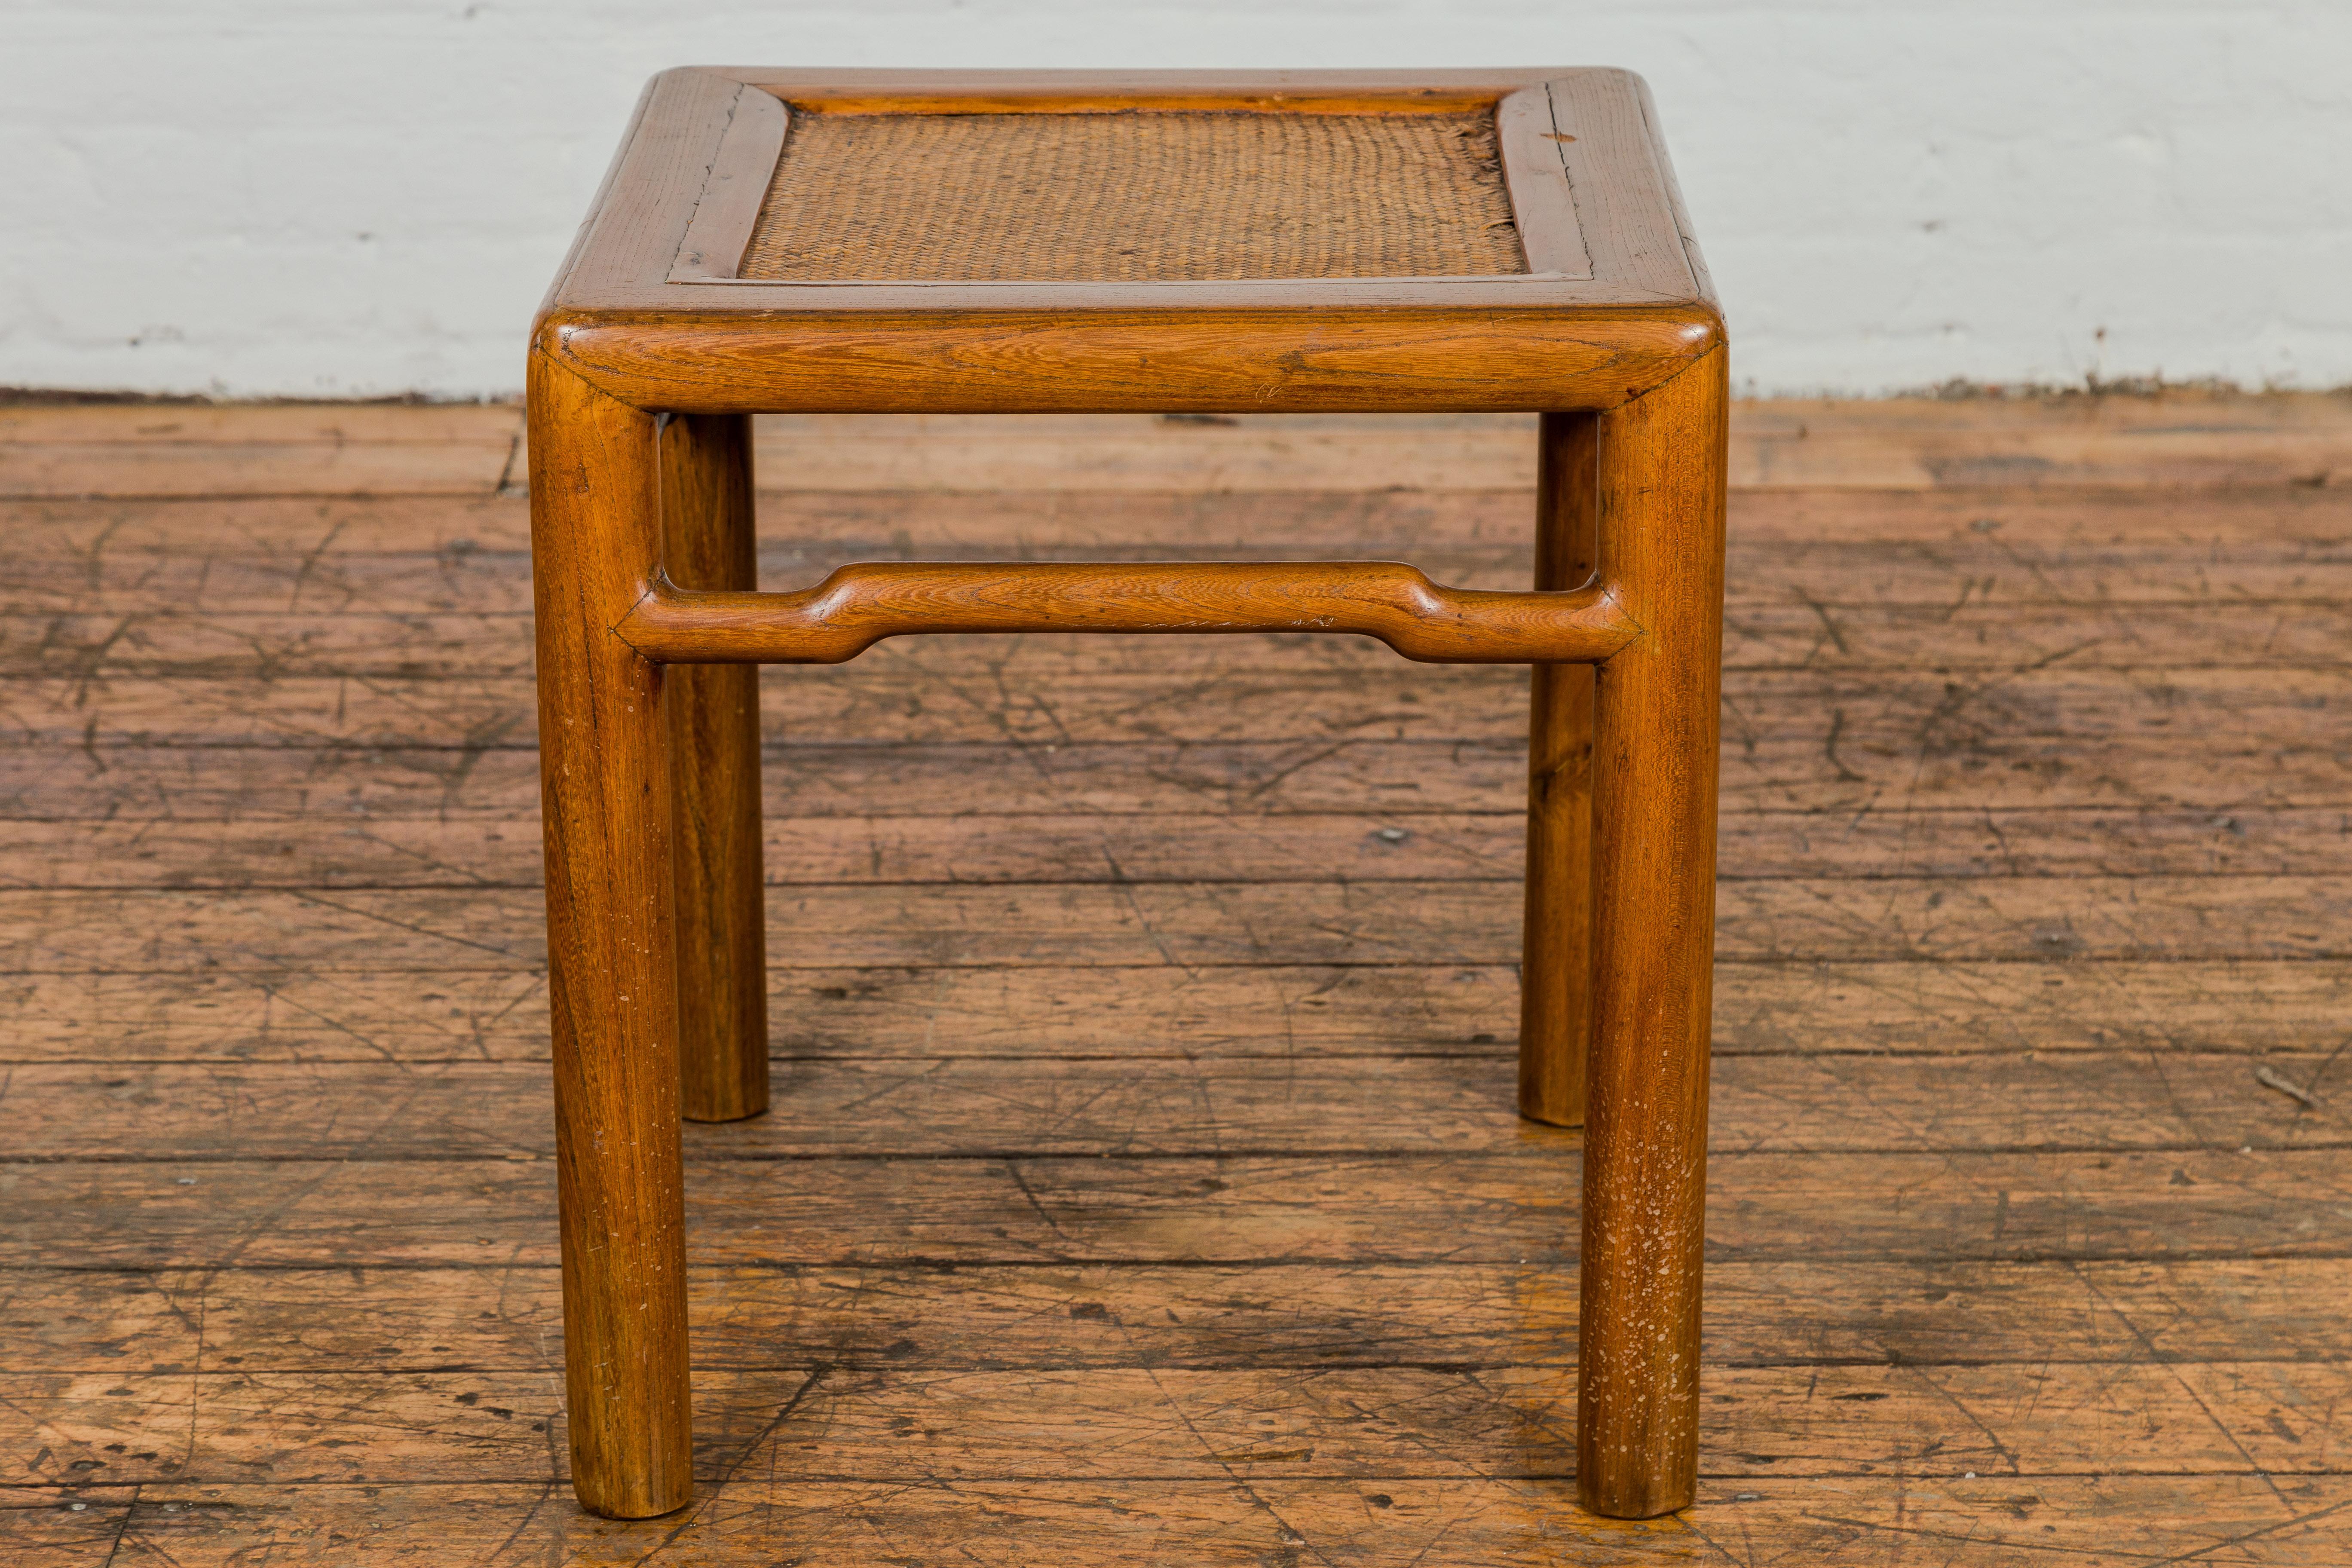 Hand-Woven Antique Small Square Side Table with Rattan Insert and Humpback Stretcher For Sale